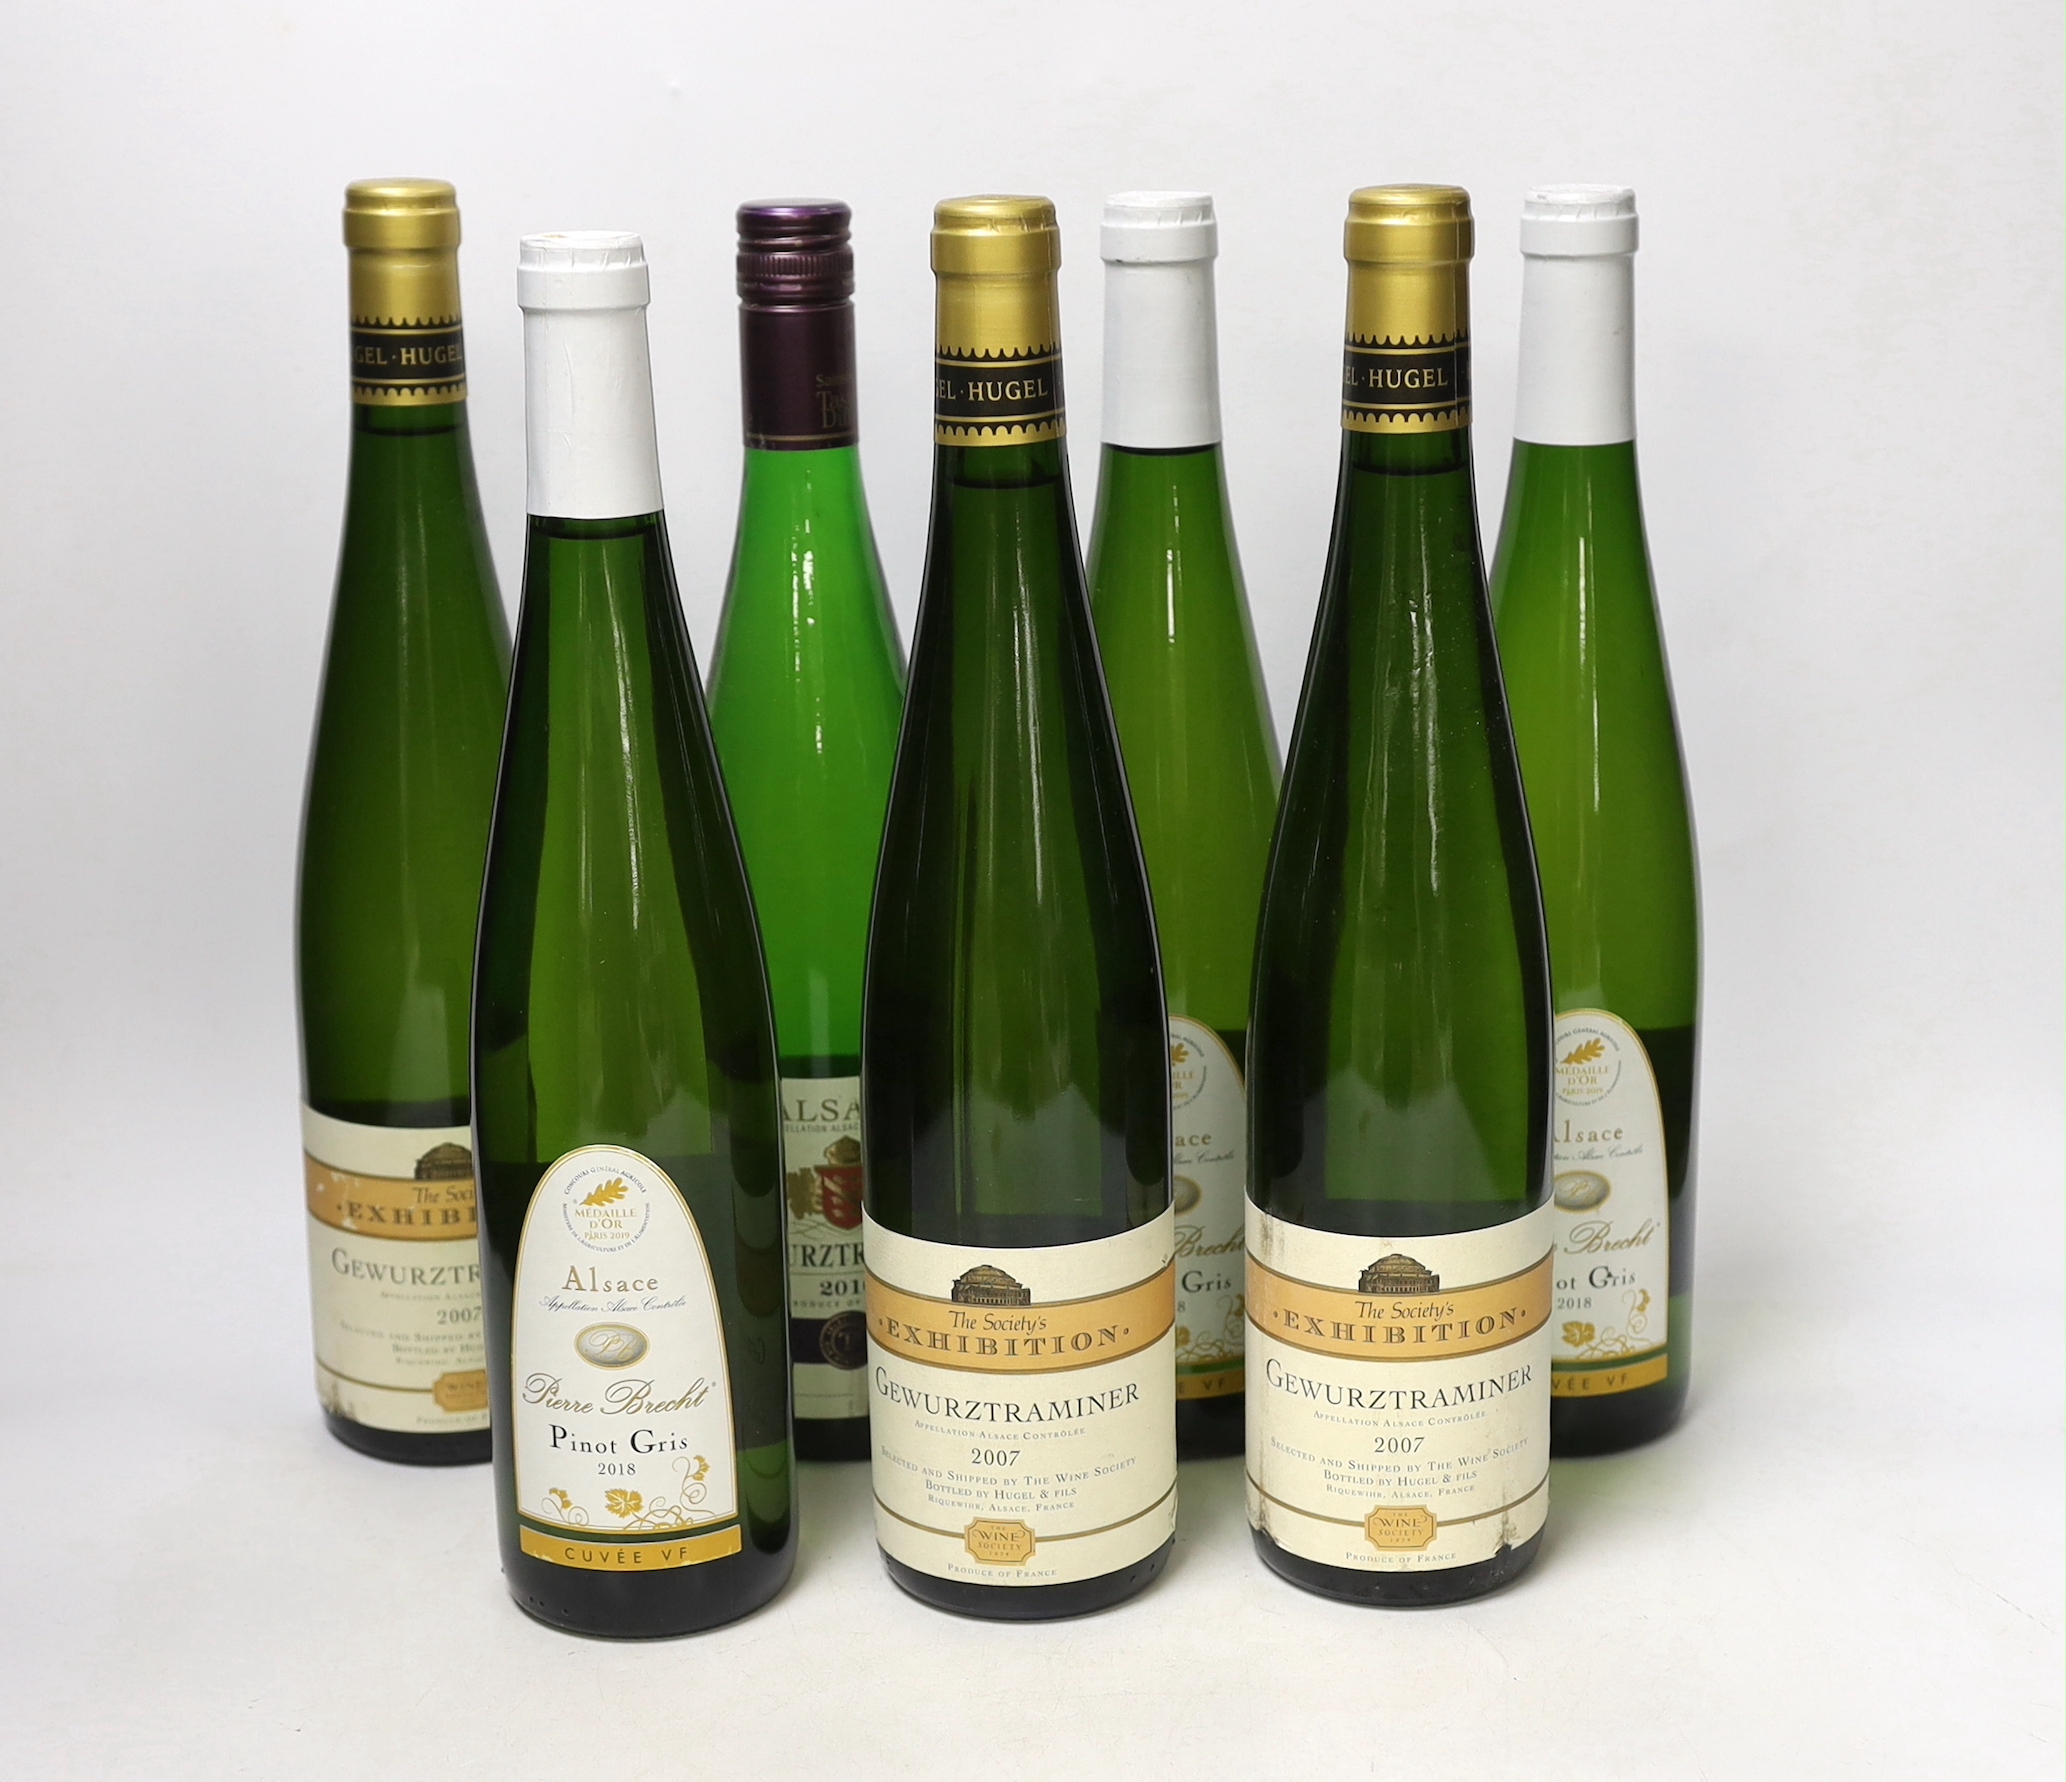 Seven bottles of white wine, Gewürztraminer and Pinot Gris